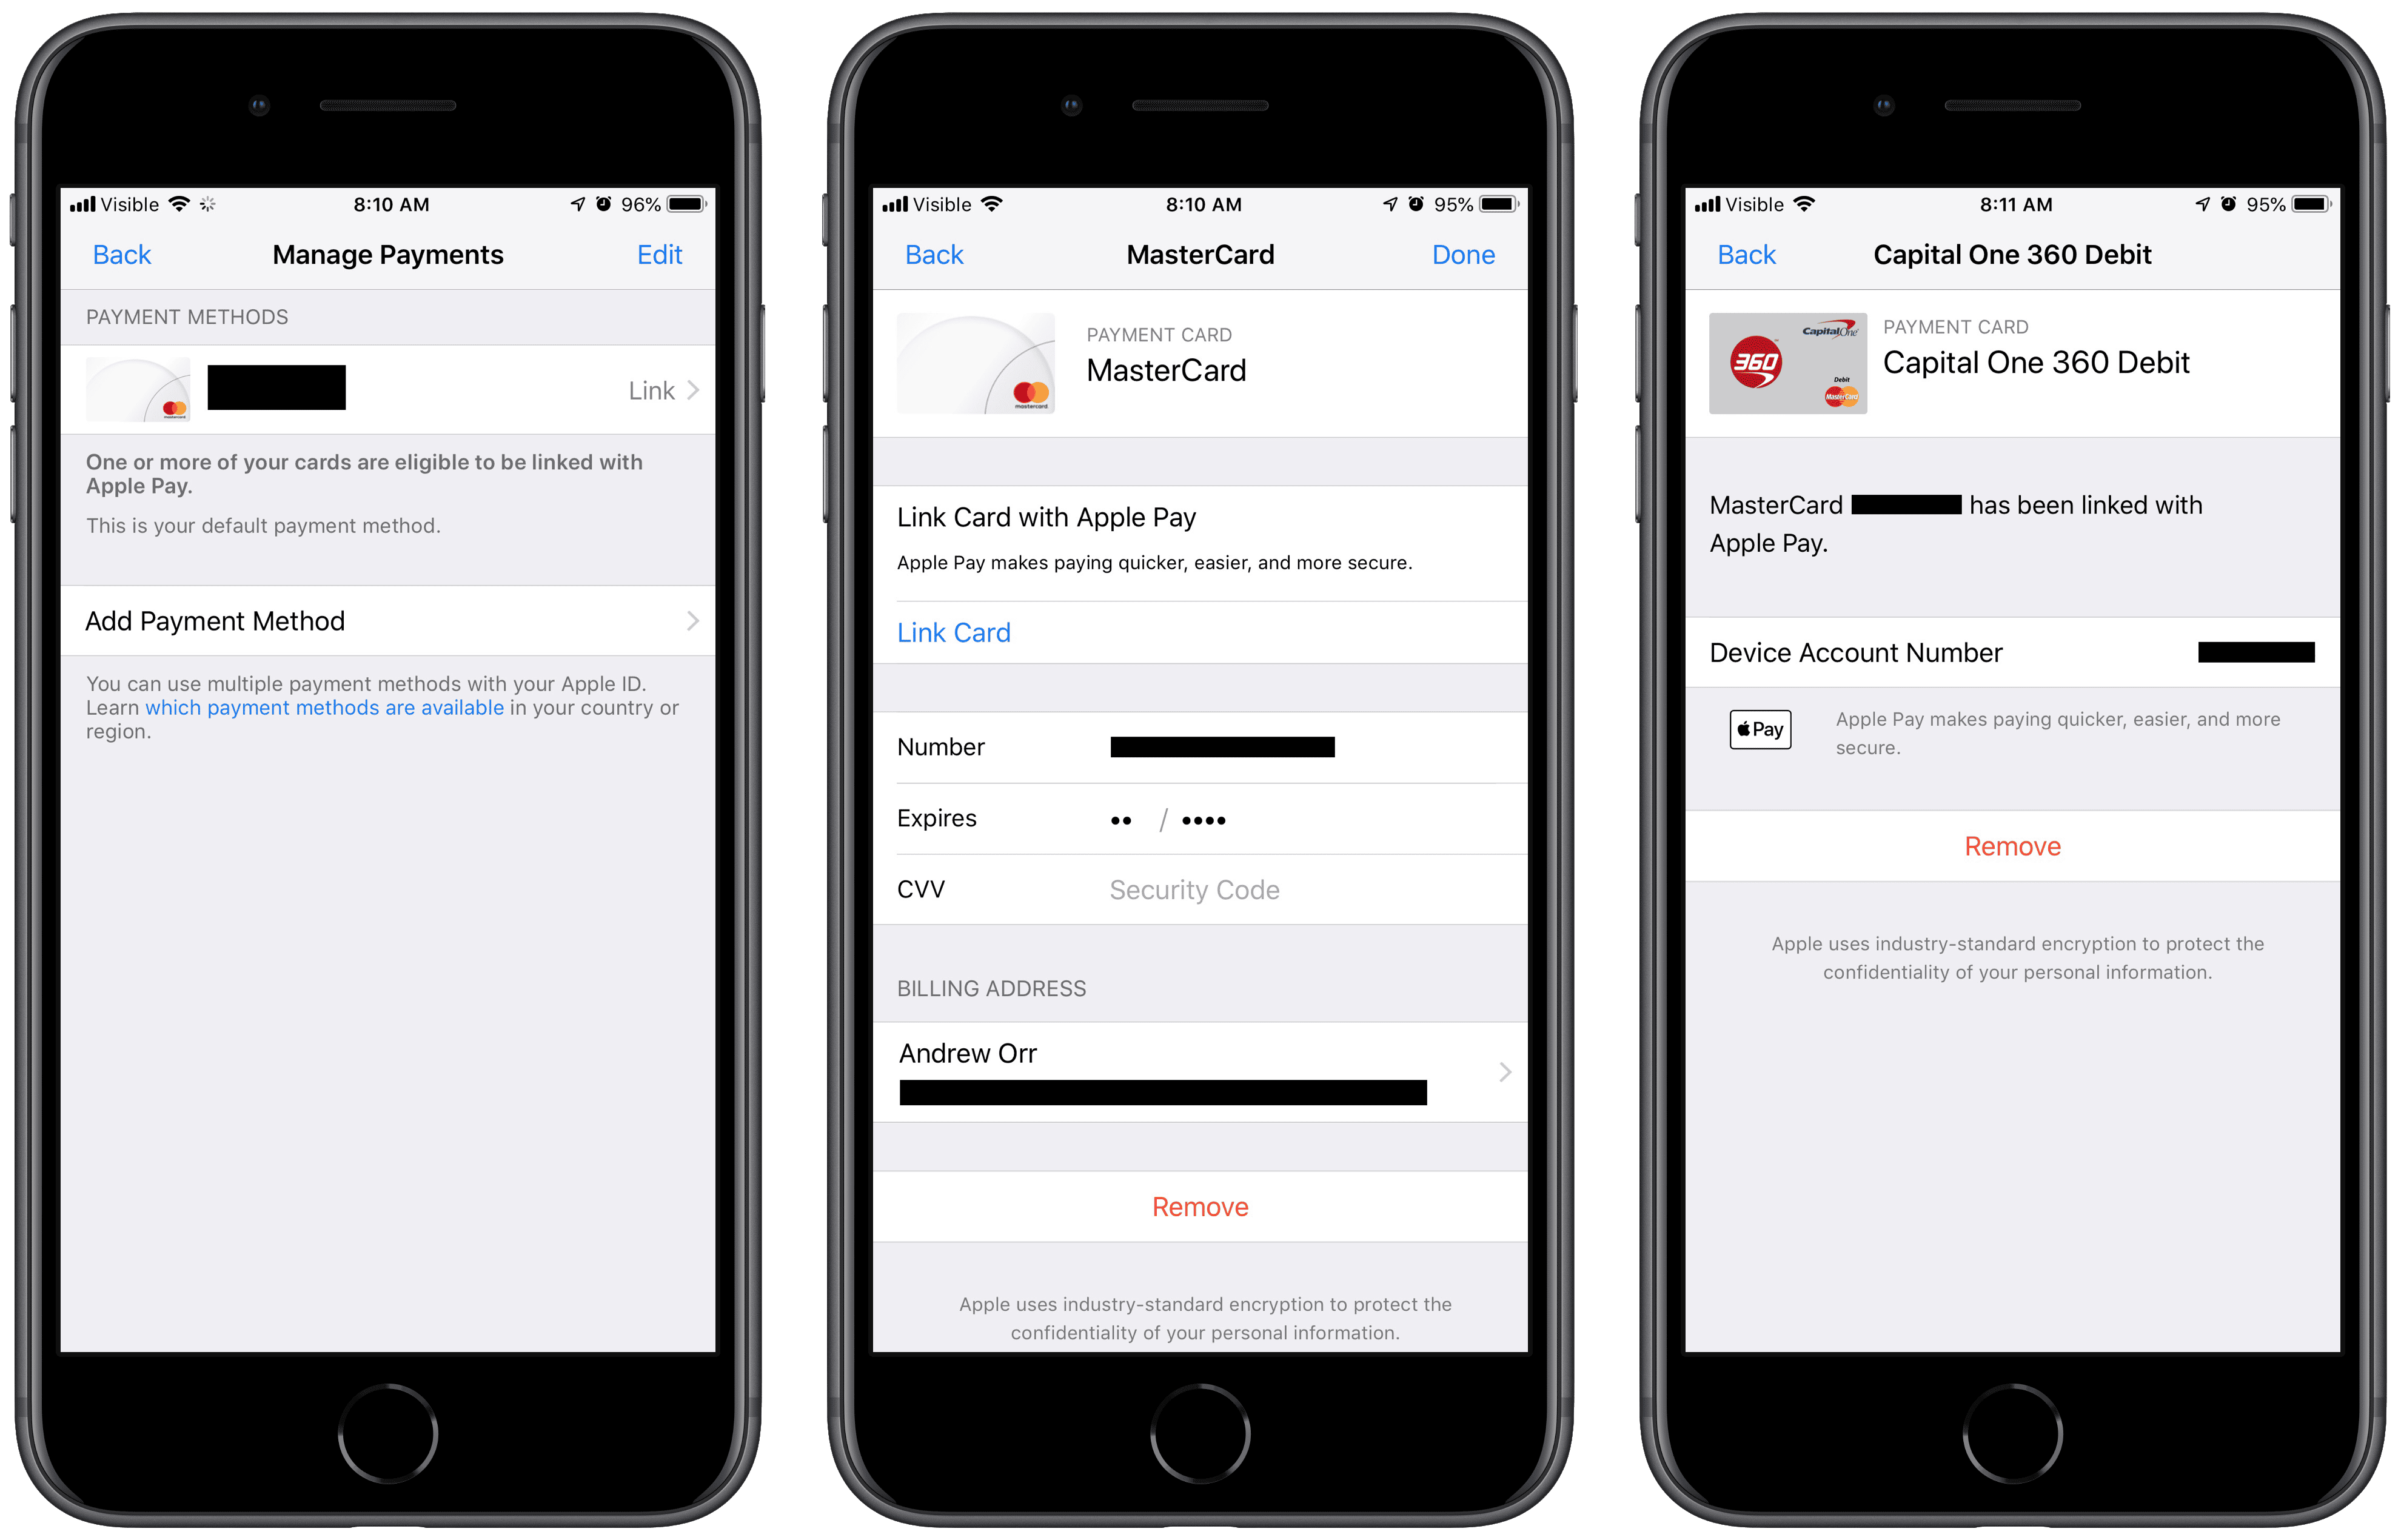 Screenshots on how to use Apple Pay in iTunes